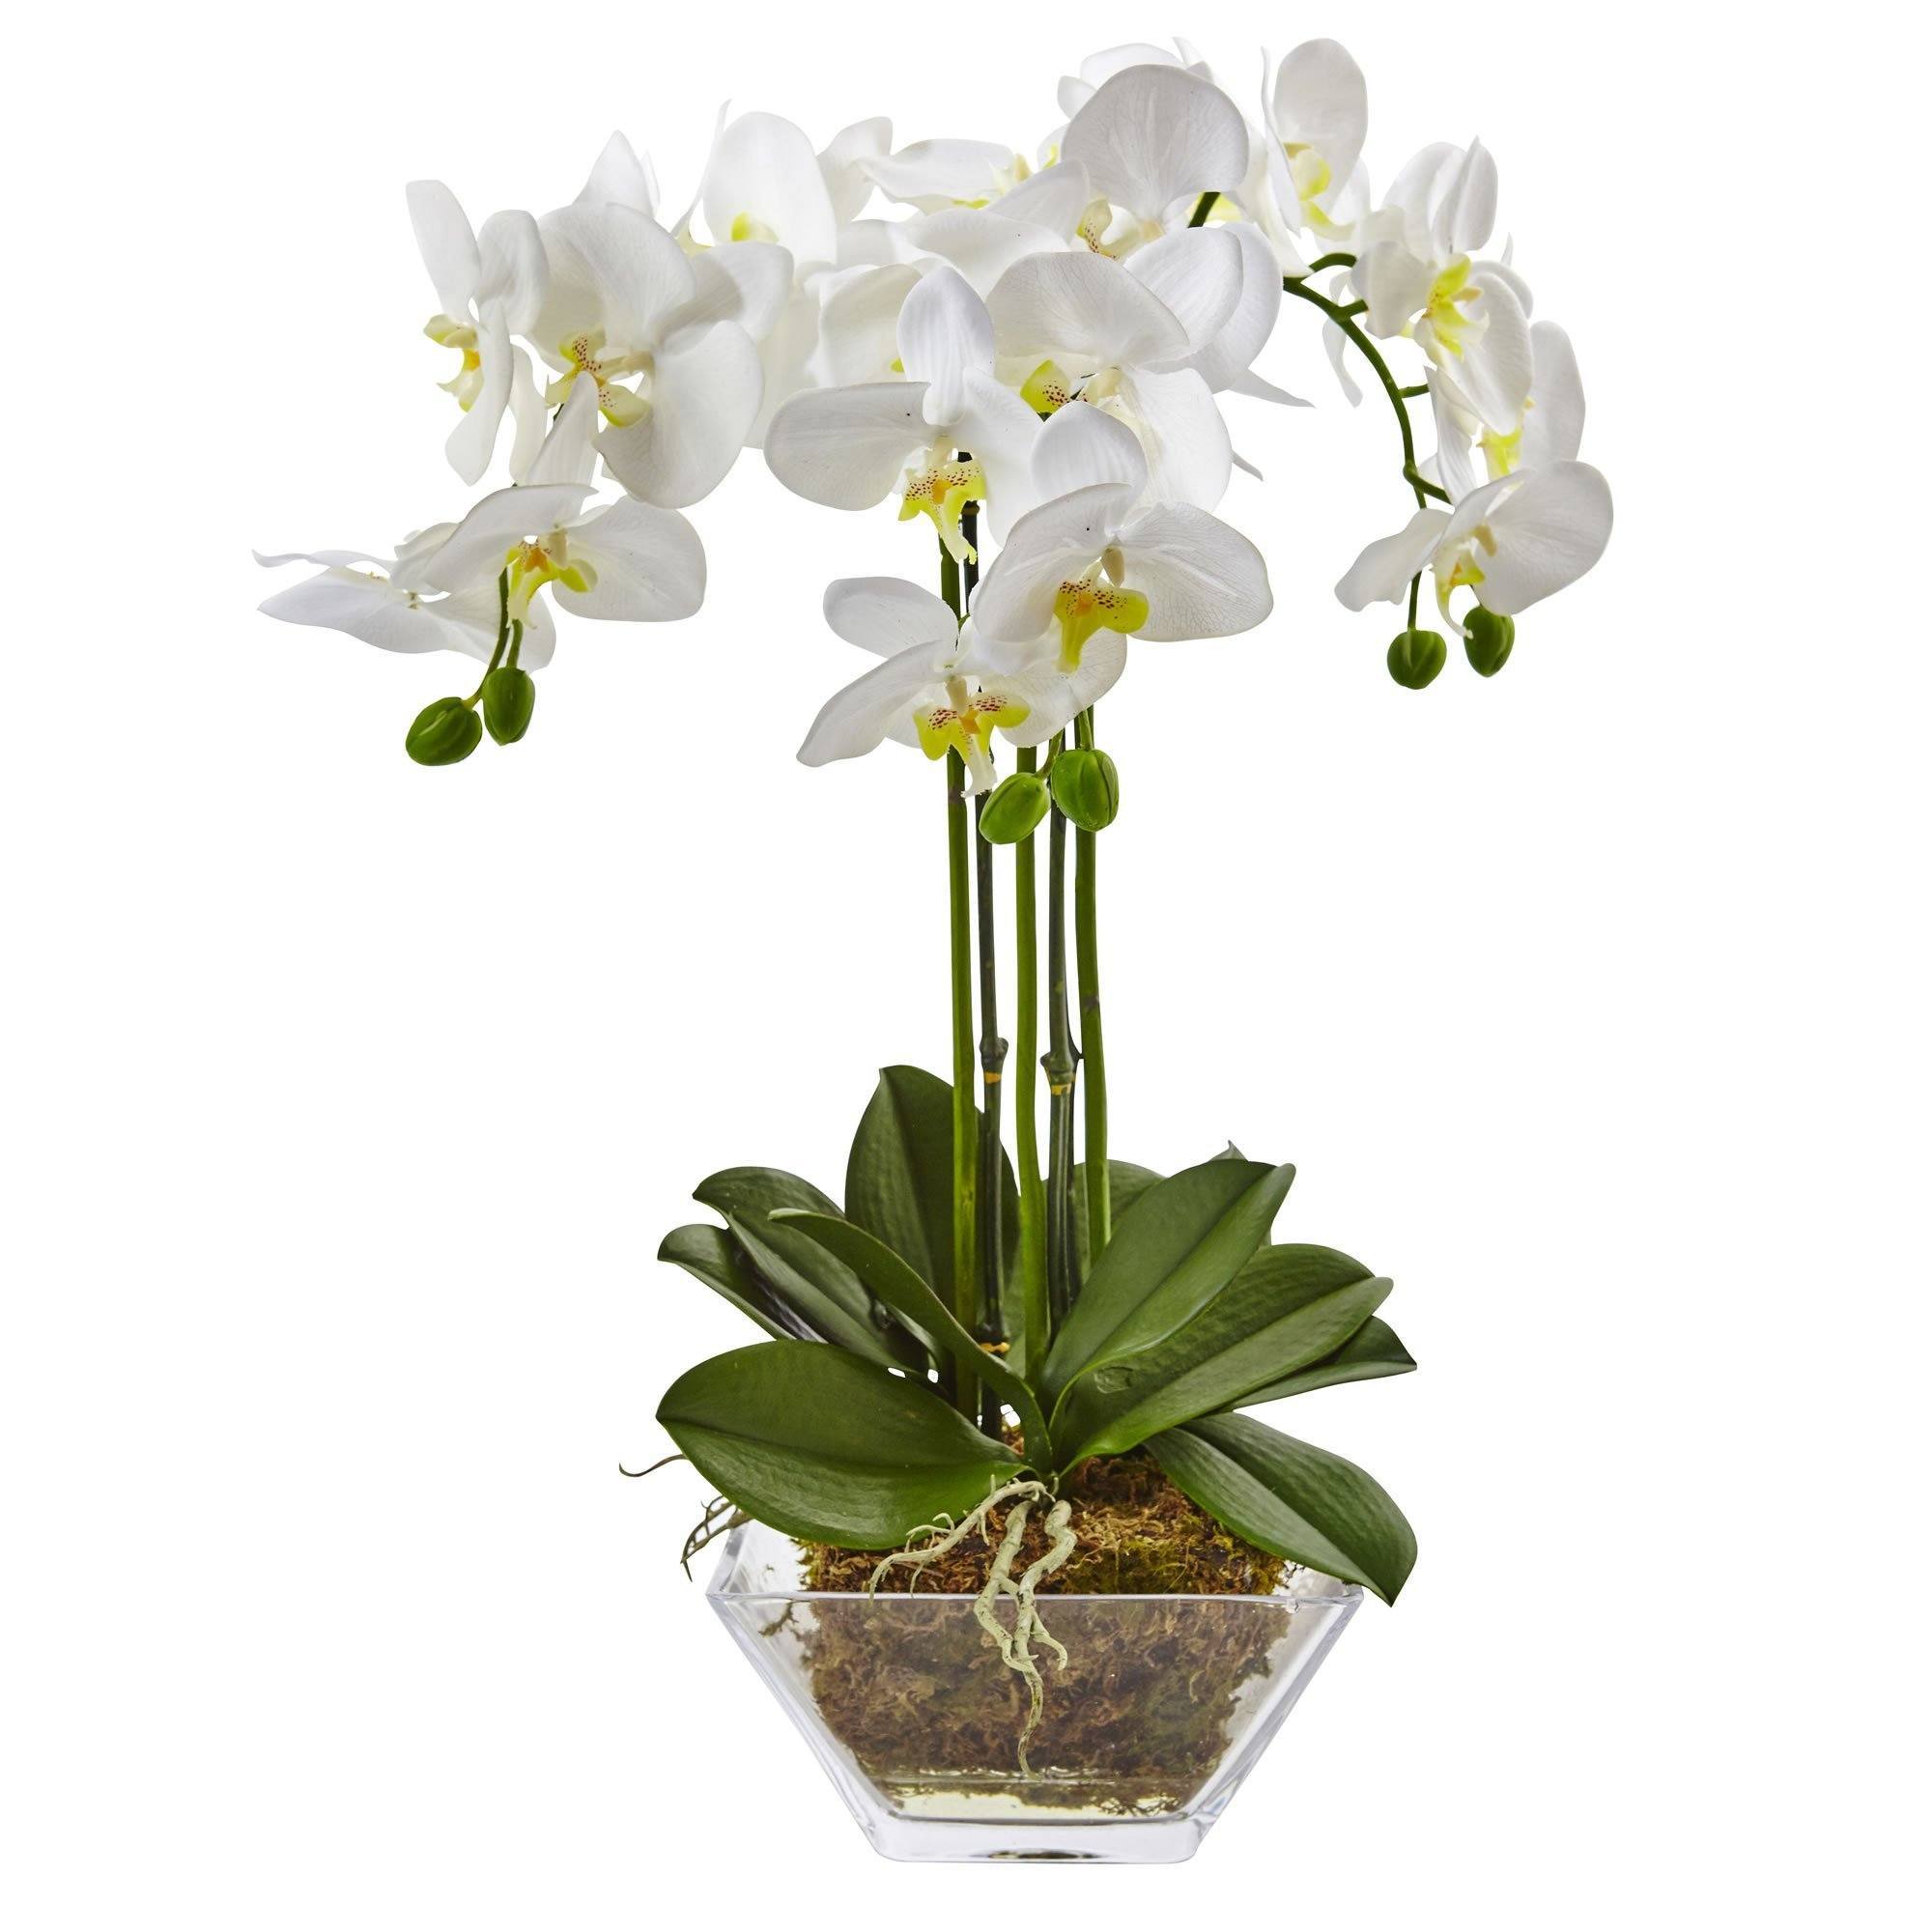 White, Large Artificial Silk Moth Orchid Flowers in Transparent Glass Vase Coffee Table Arrangement Centerpiece Decor Real Touch Natural Looking Phalaenopsis Flowers and Greens 